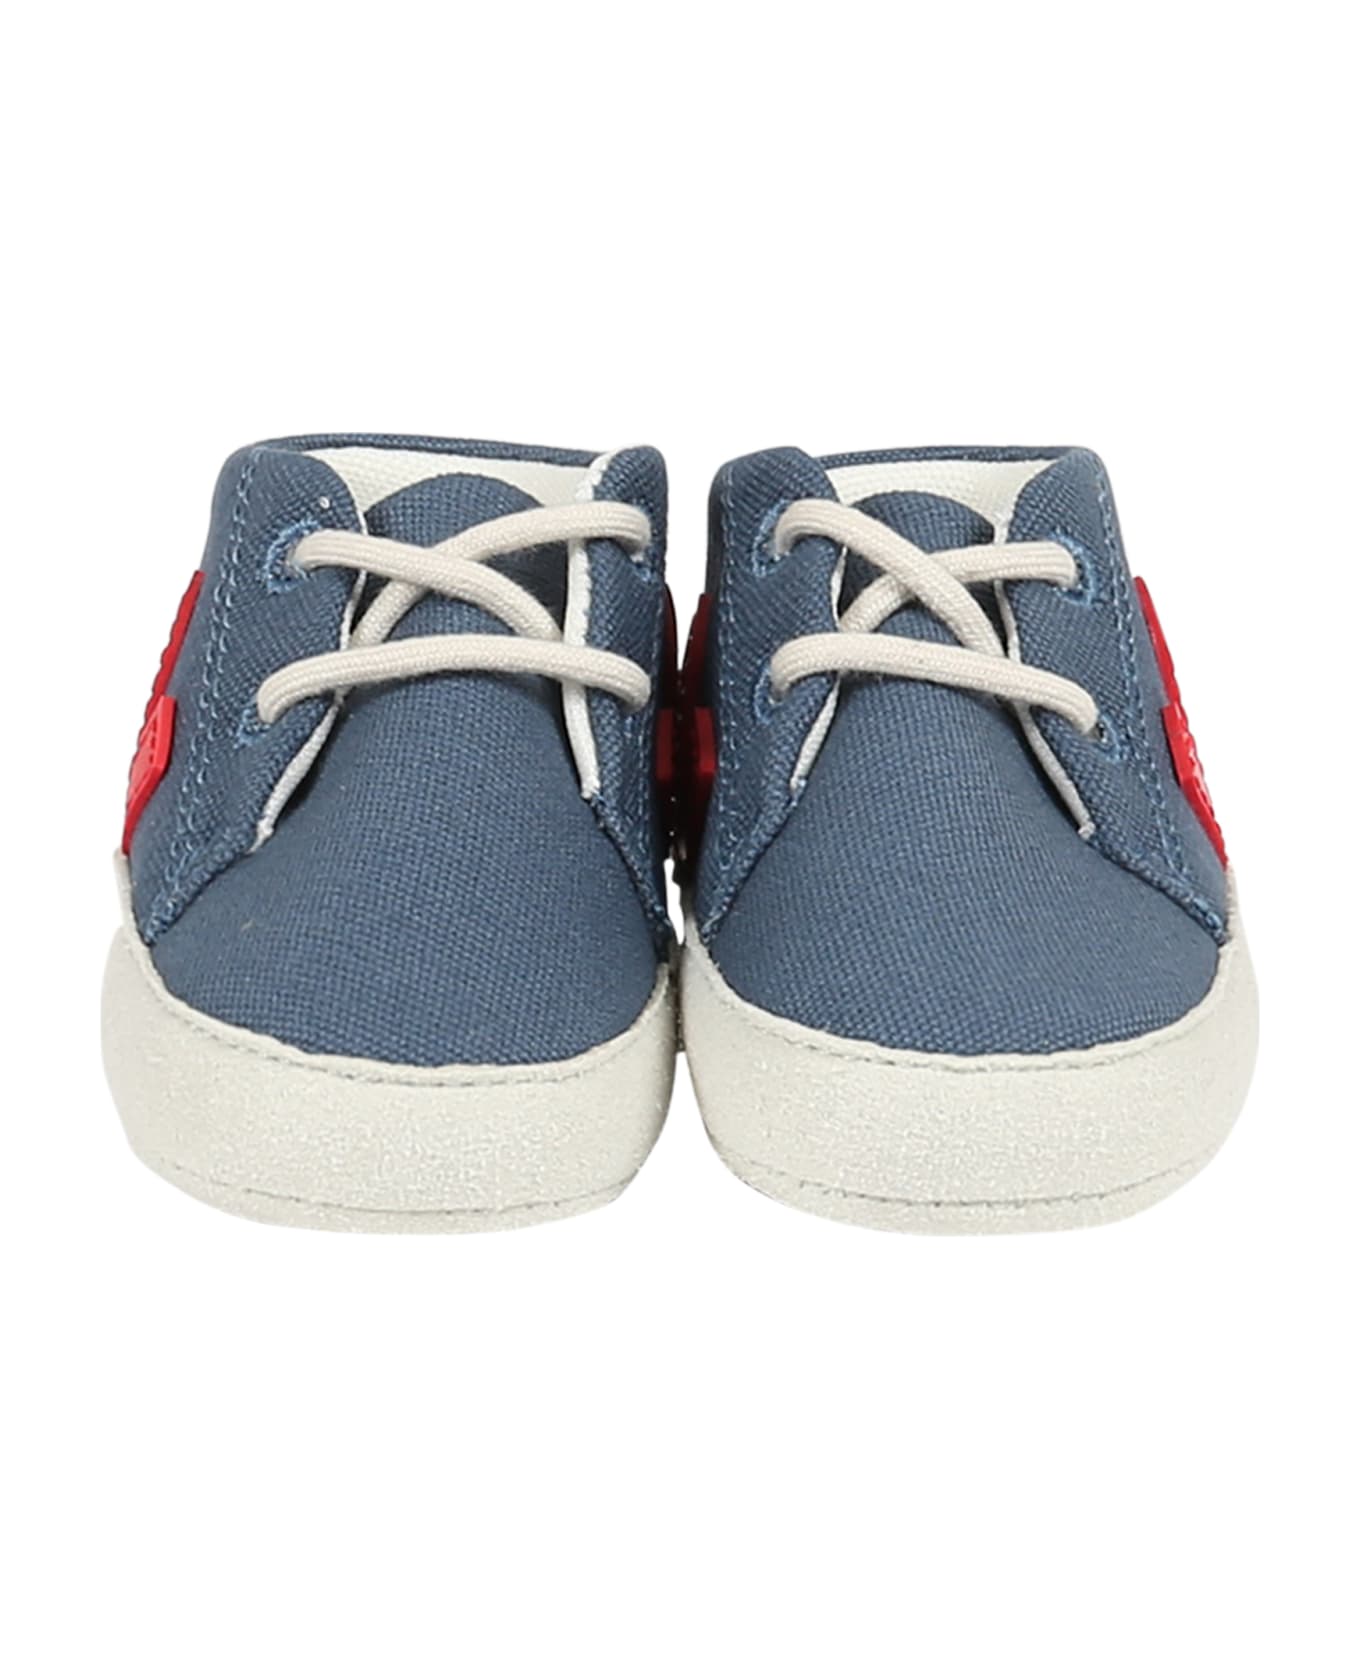 Veja Blue Sneakers For Baby Boy With Red Logo - Blue シューズ